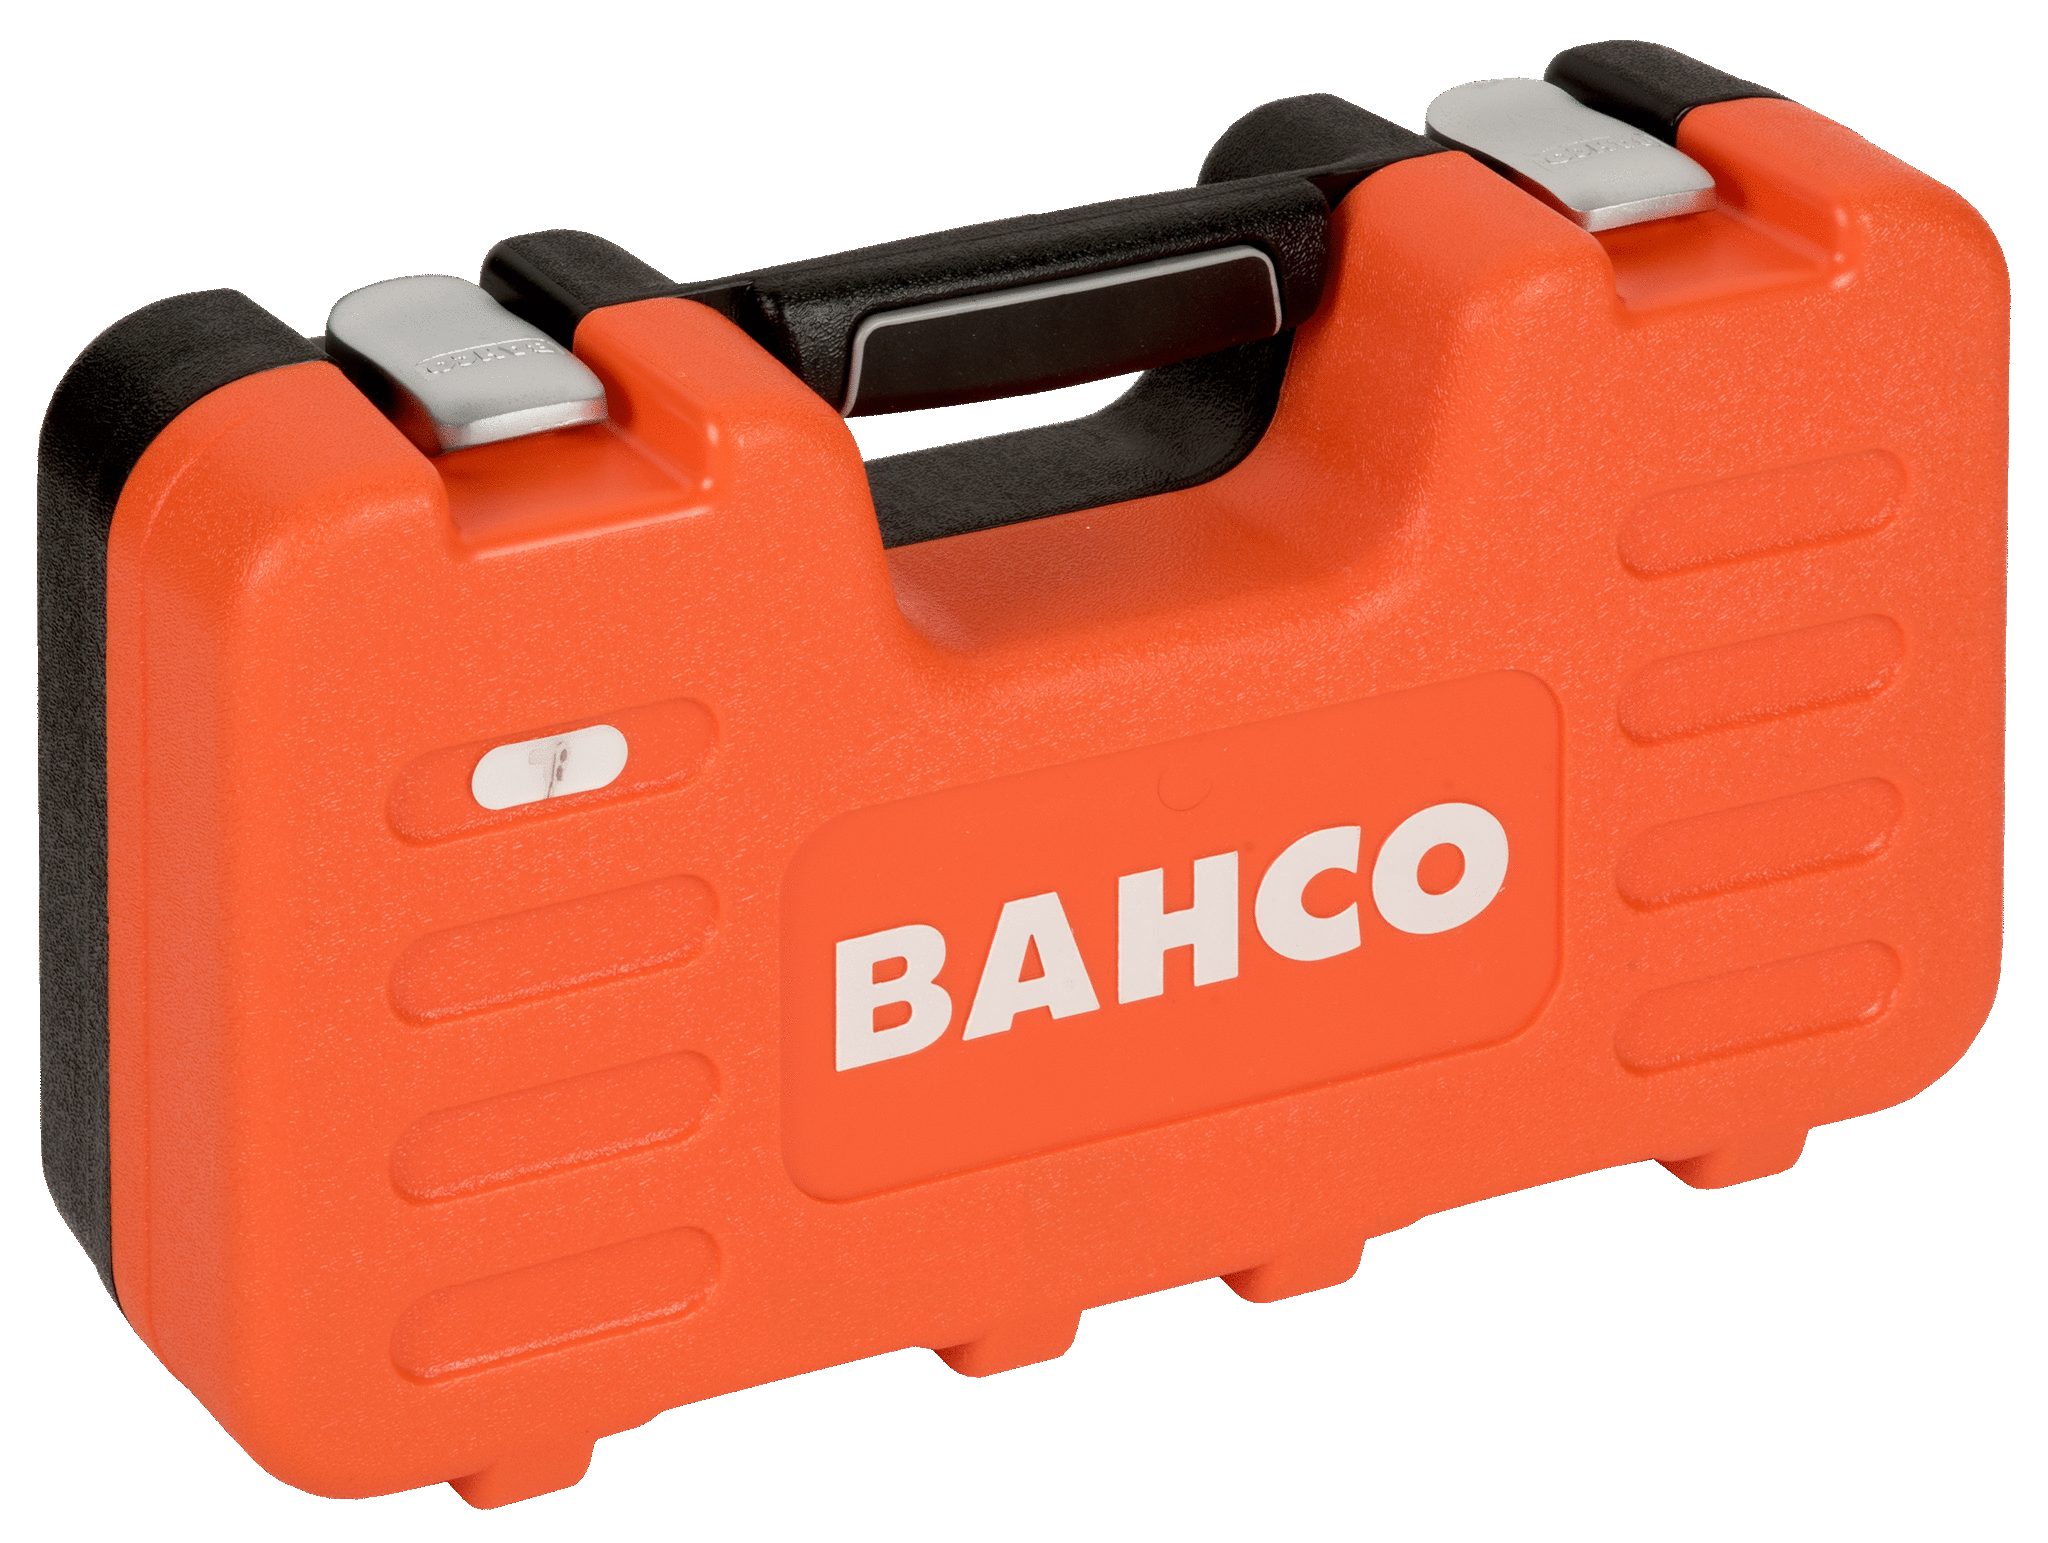 1/2" Square Drive Socket Set with Metric Hex Profile and Ratchet - S240 by Bahco